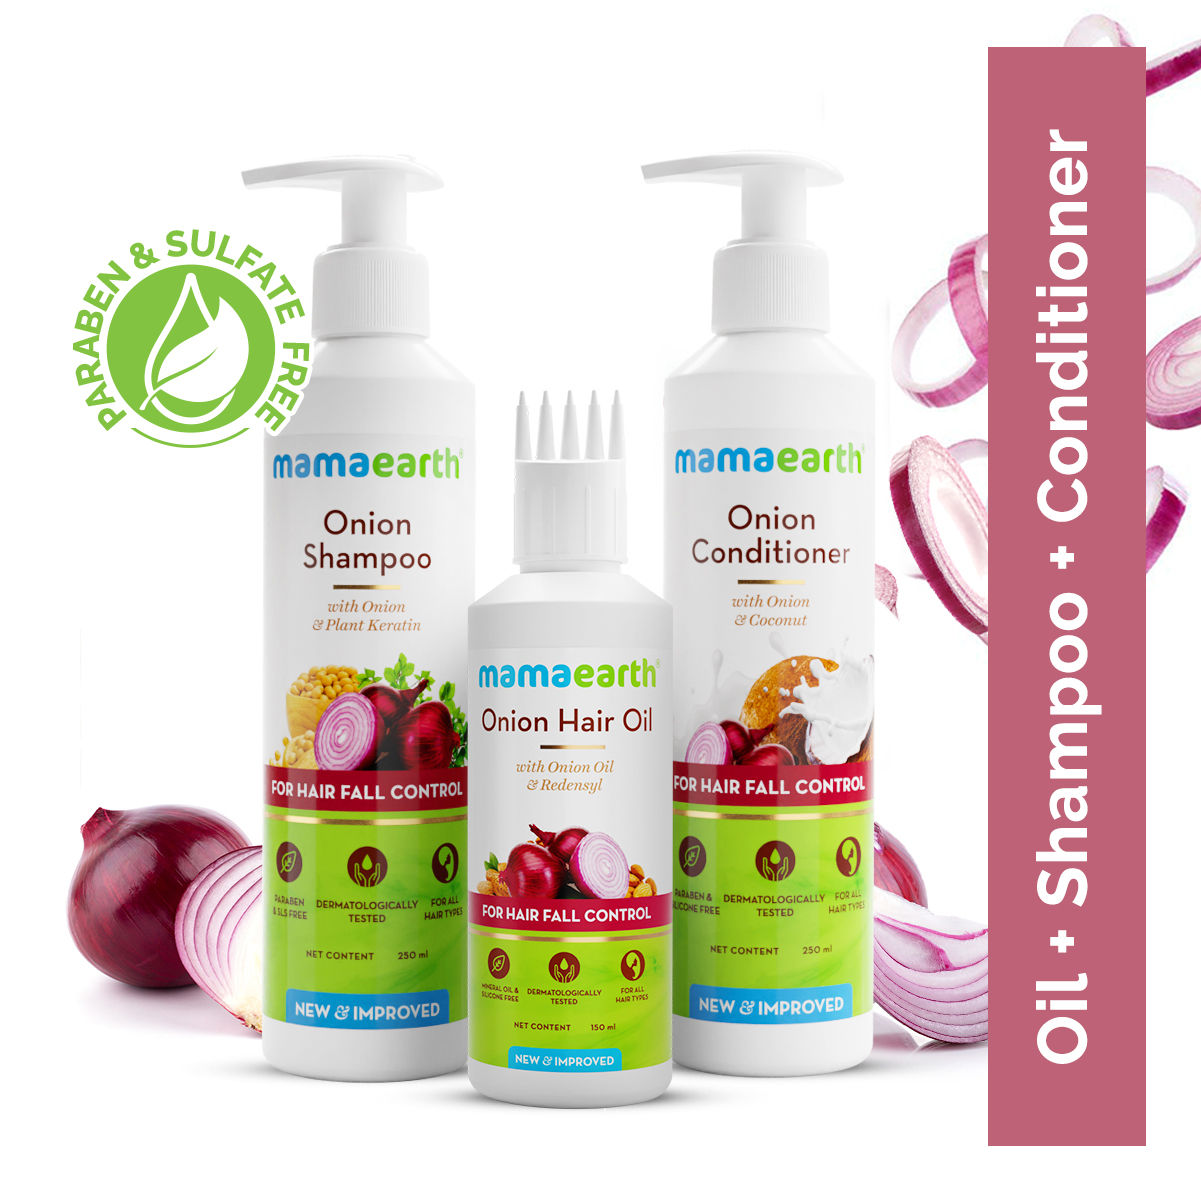 Mamaearth Onion Anti Hair Fall Spa Range with Shampoo + Conditioner + Oil for Hair Fall Control